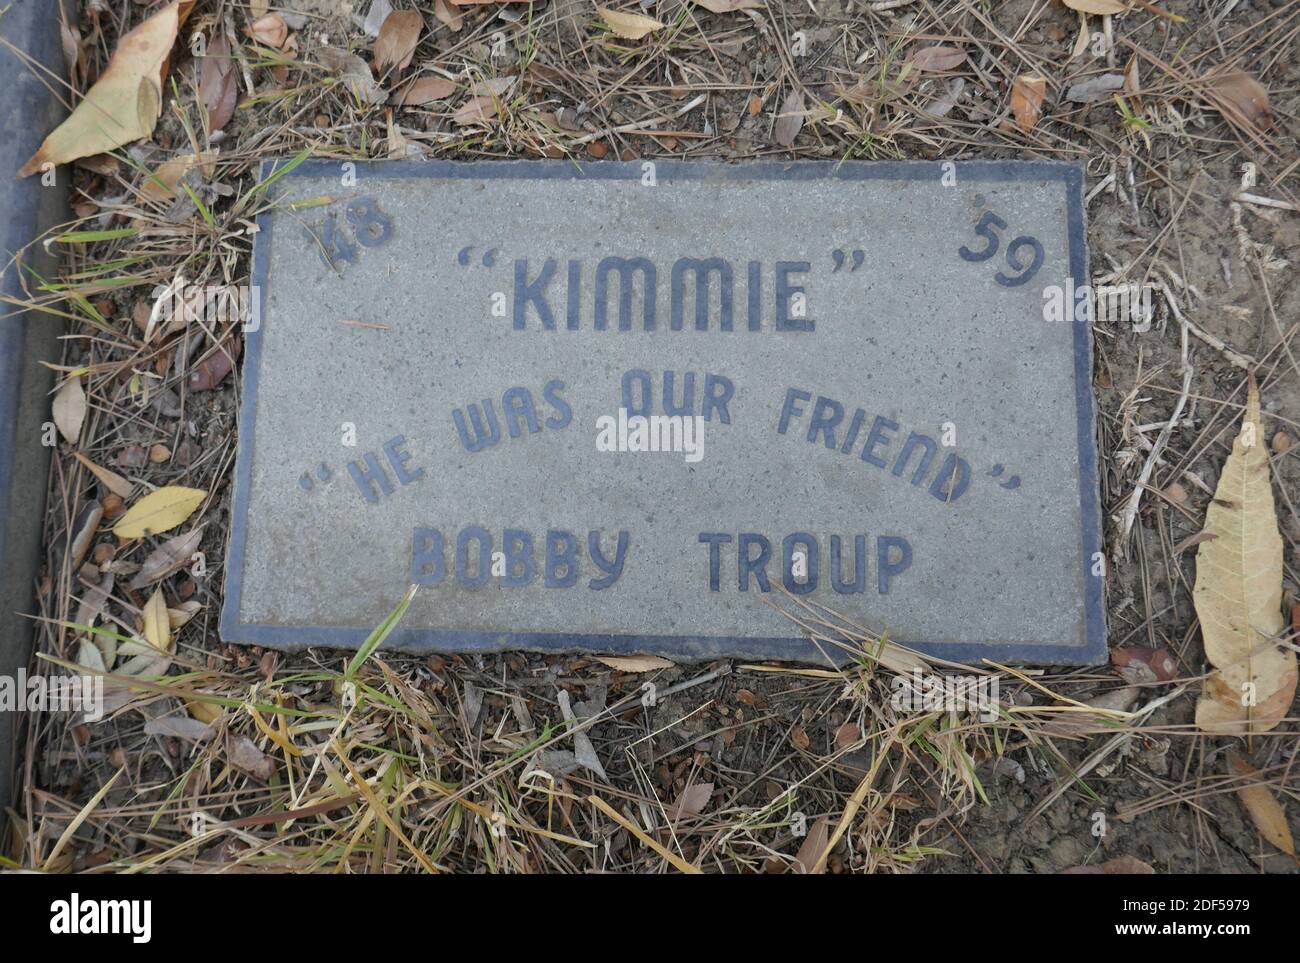 Gardena, California, USA 2nd December 2020 A general view of atmosphere of actor Bobby Troup's Pet Kimmie's Grave at Pet Haven Cemetery on December 2, 2020 at 18300 S. Figueroa Street in Gardena, California, USA. Photo by Barry King/Alamy Stock Photo Stock Photo